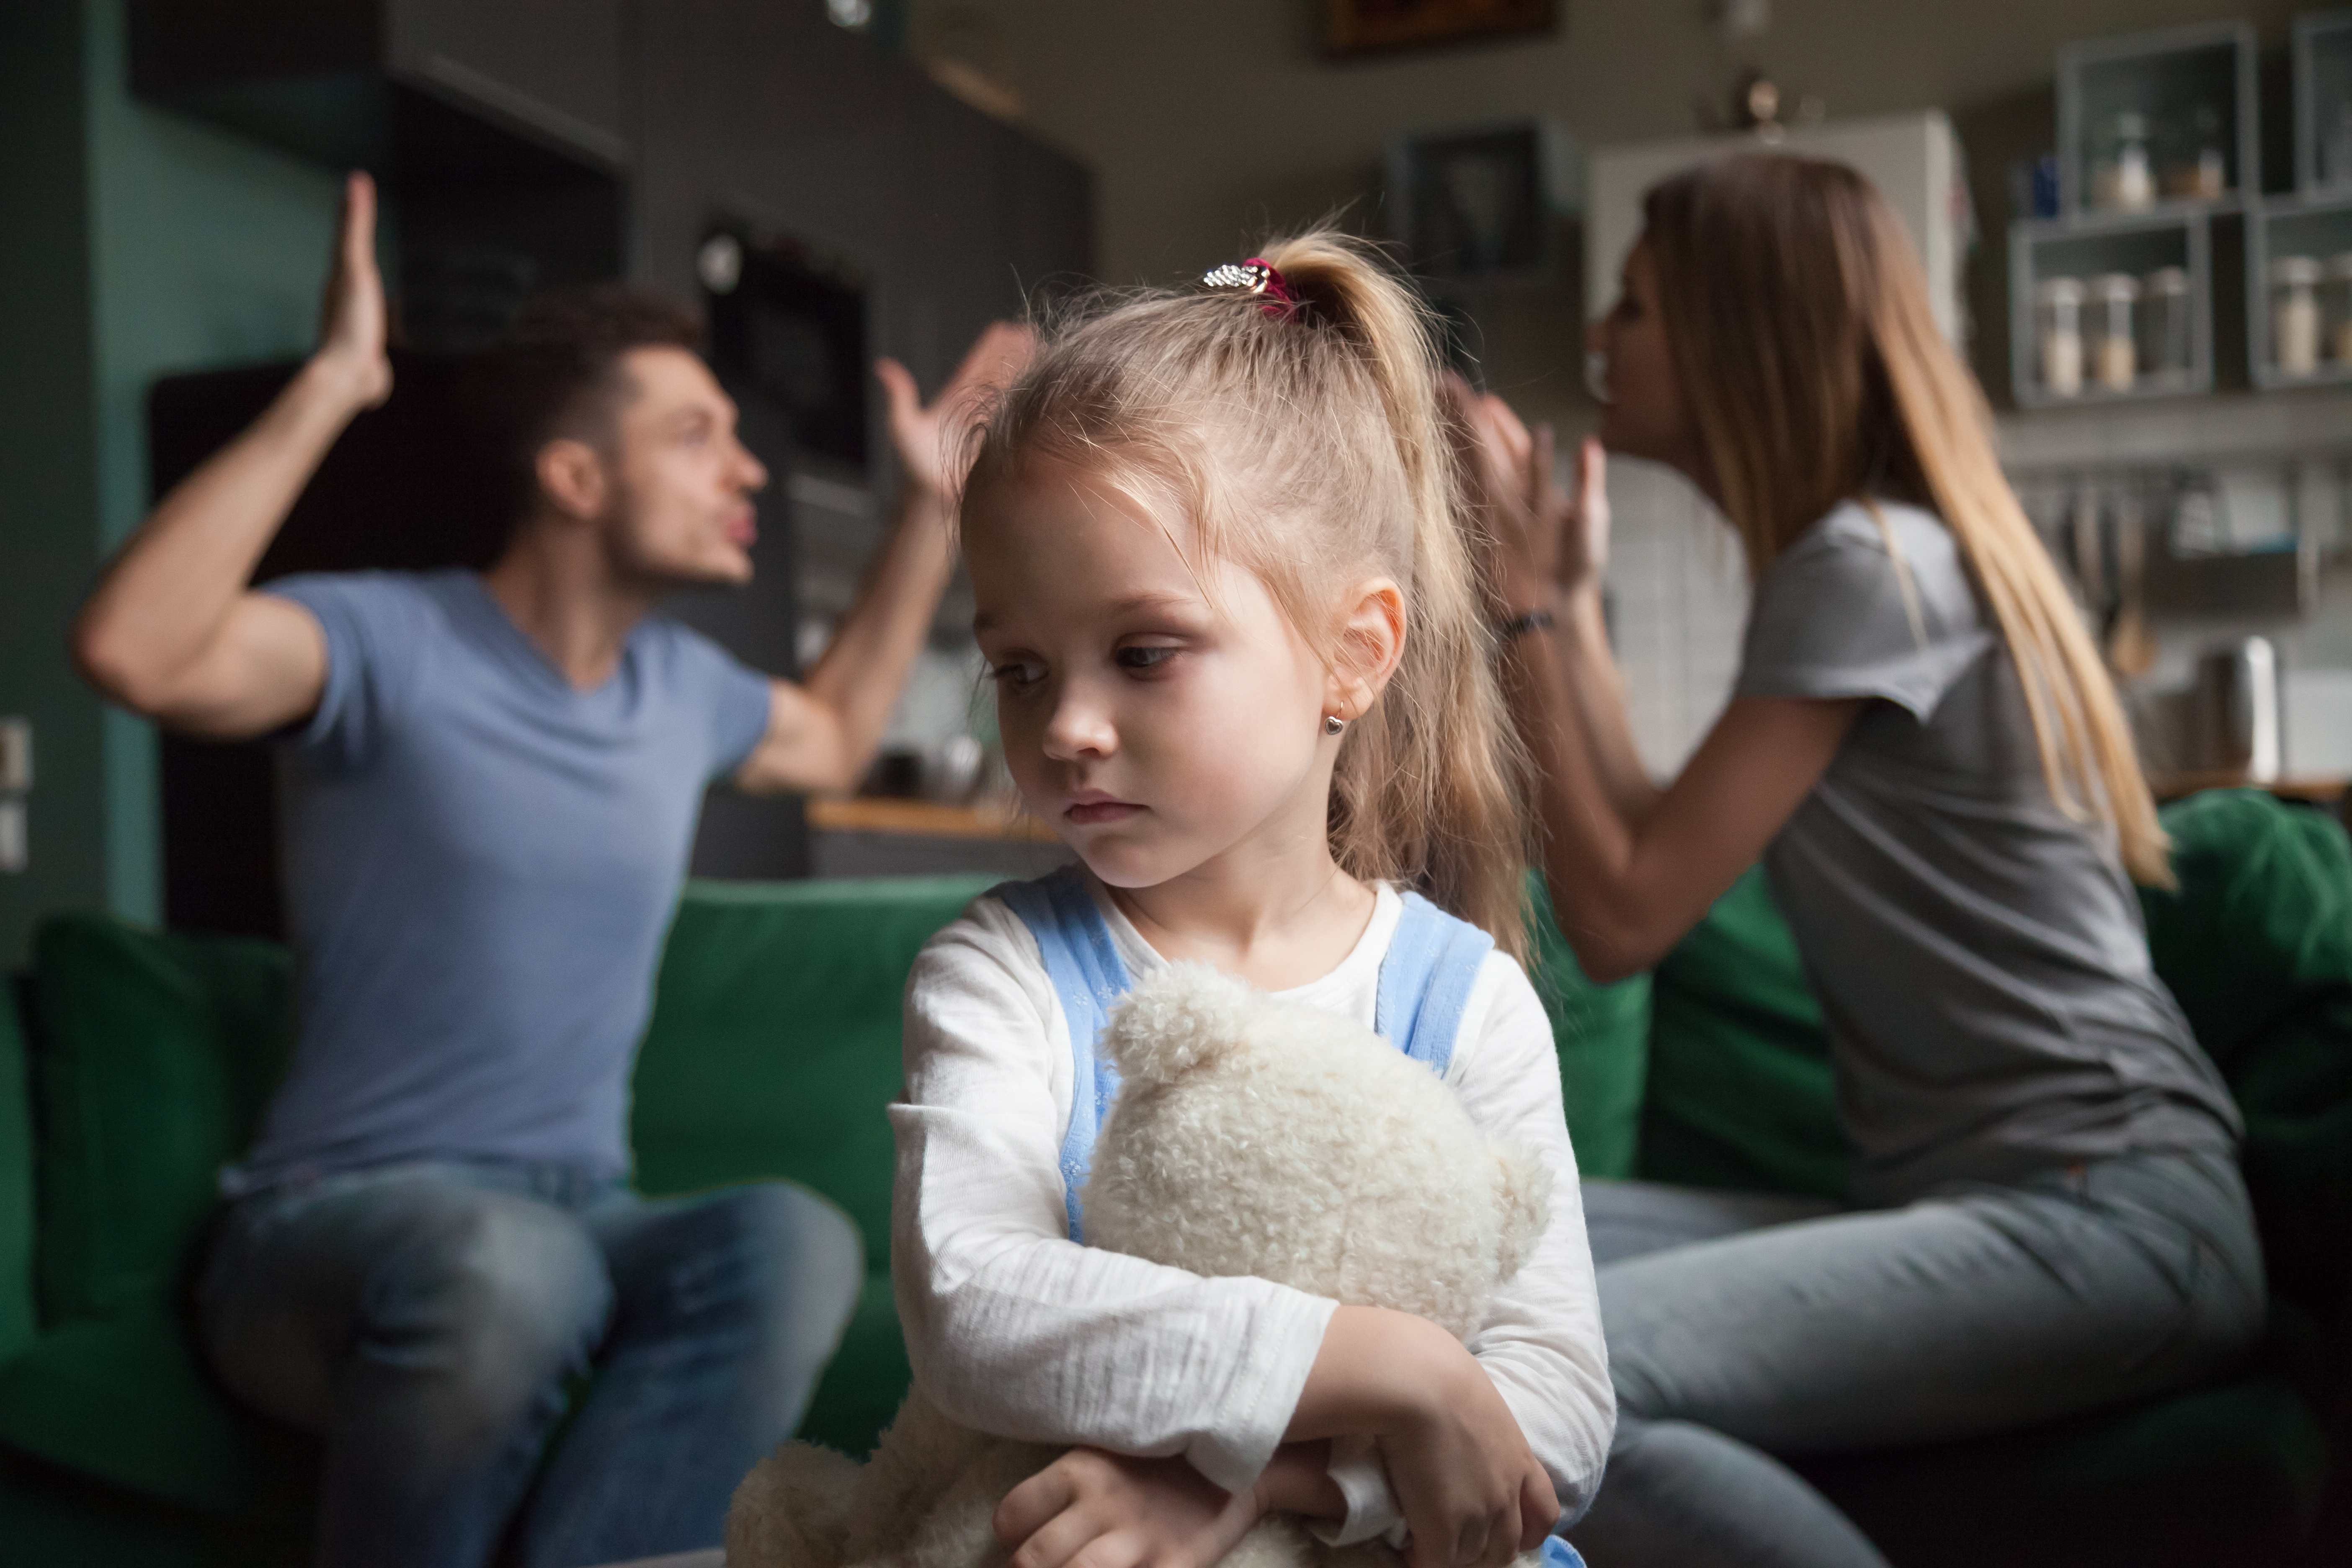 A little girl feeling upset while her parents argue in the background | Source: Shutterstock